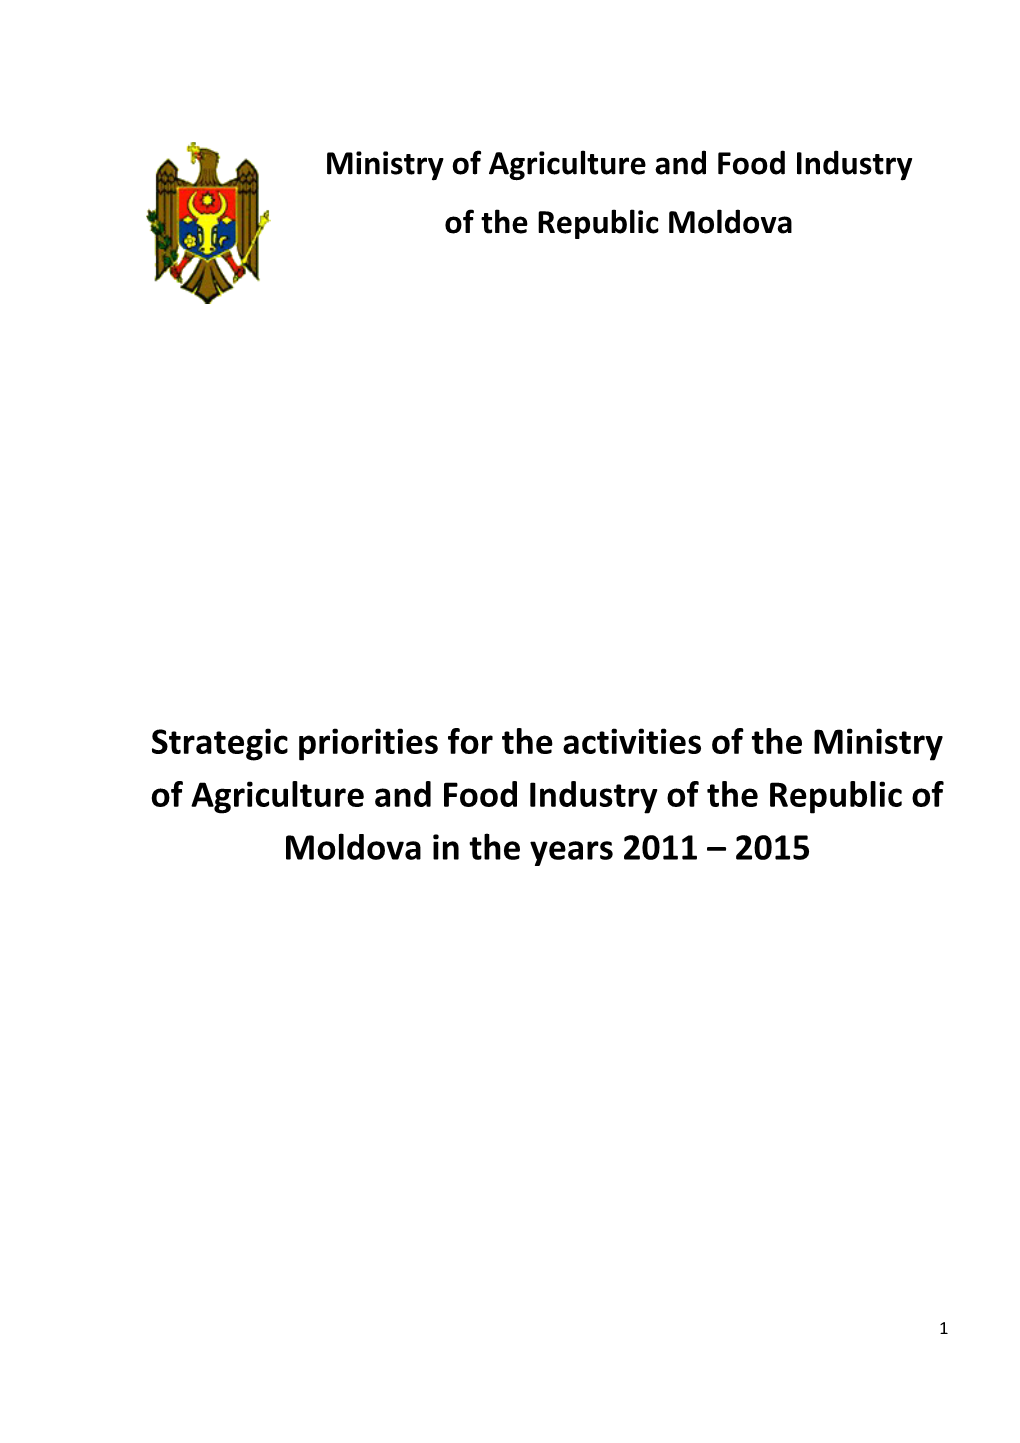 1.Food Safety Strategy for the Republic of Moldova 2011 2015